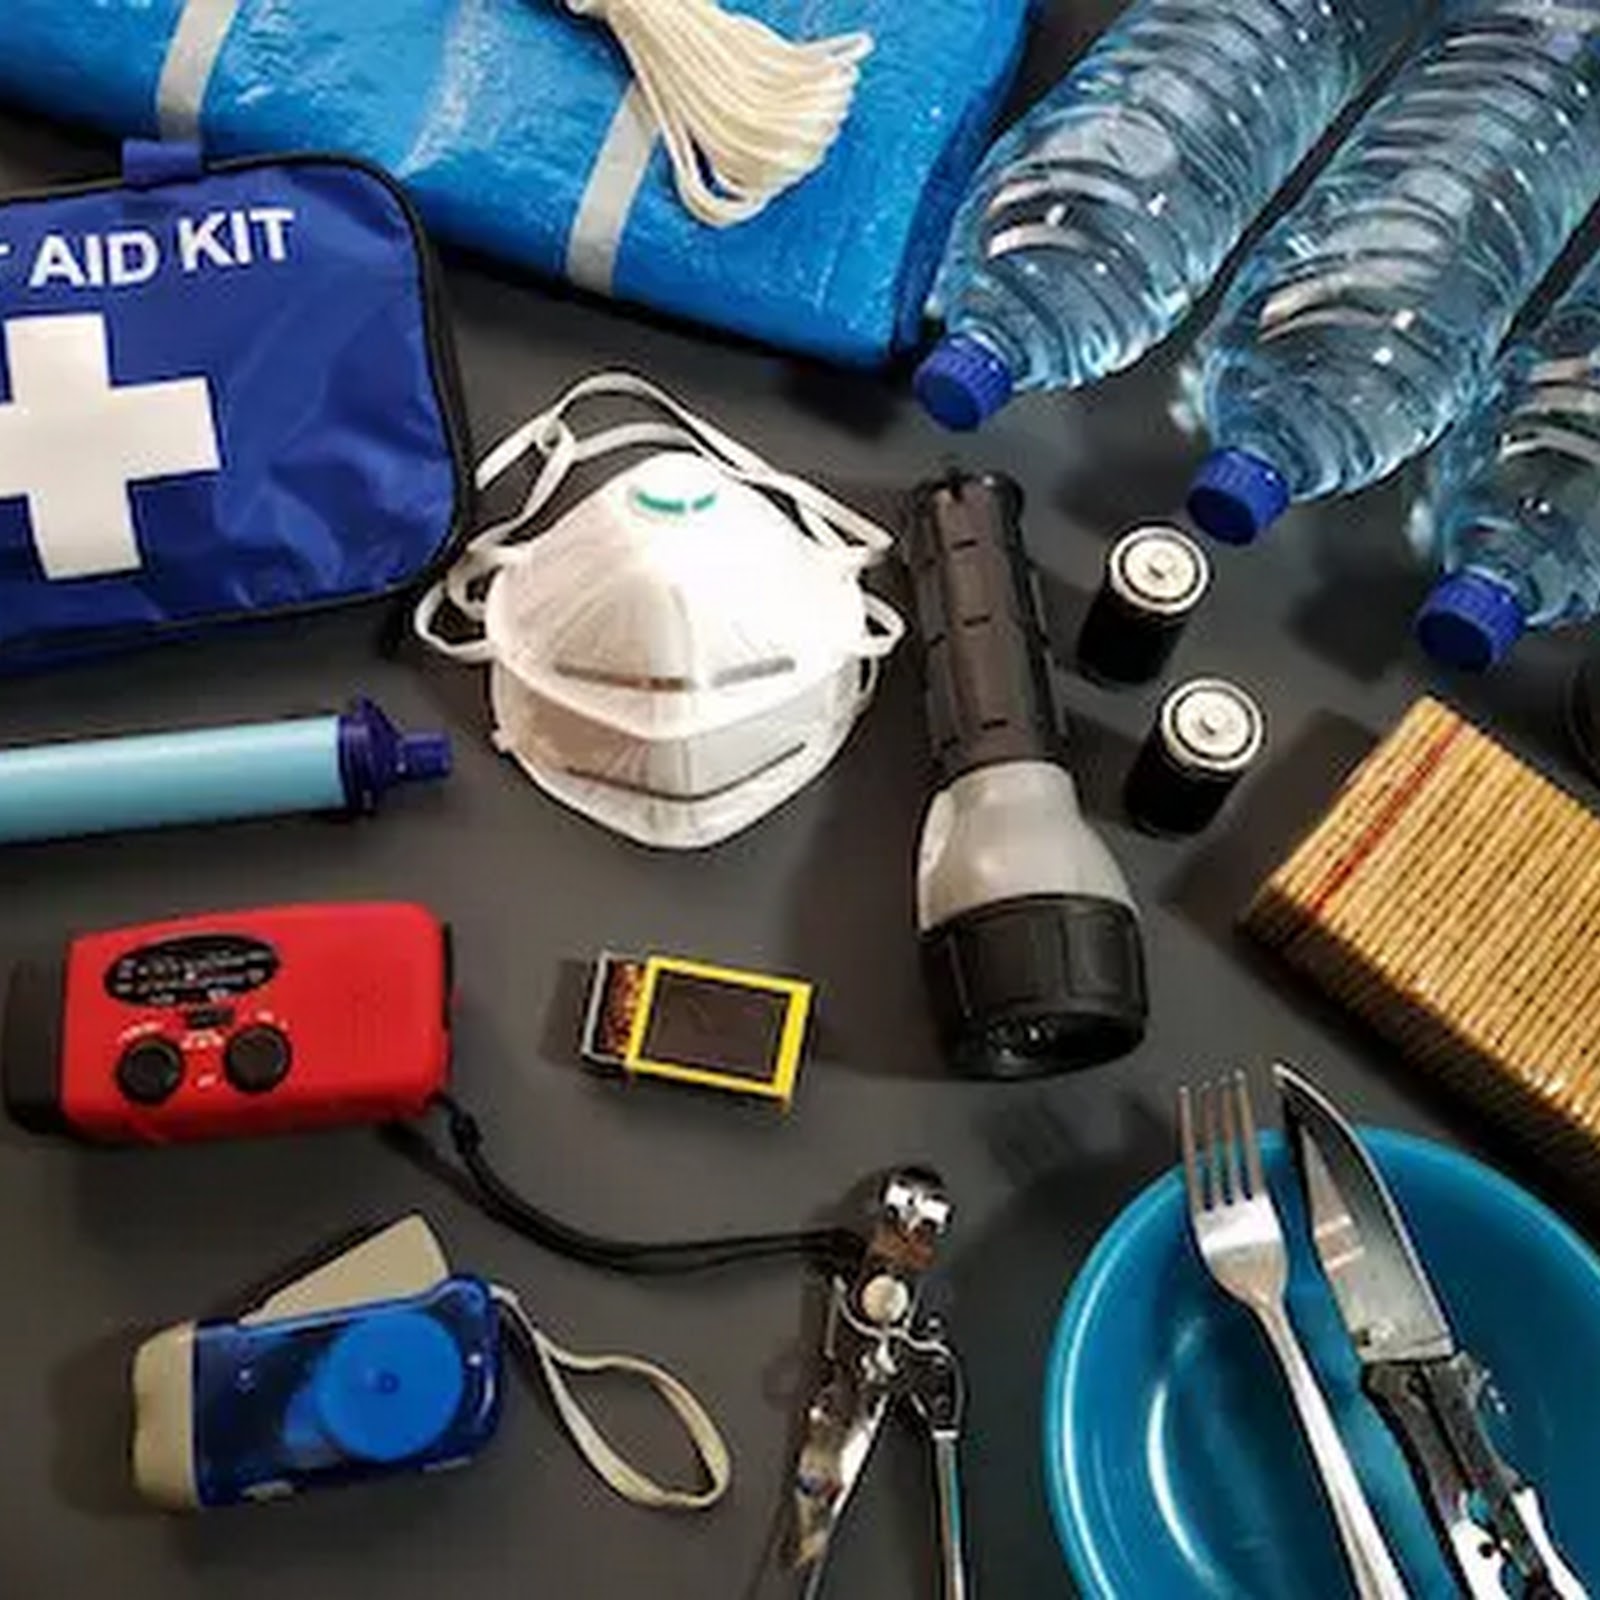 20 First Aid Items You Should Always Have at Home for any Emergency. -  Health and Harmony Haven